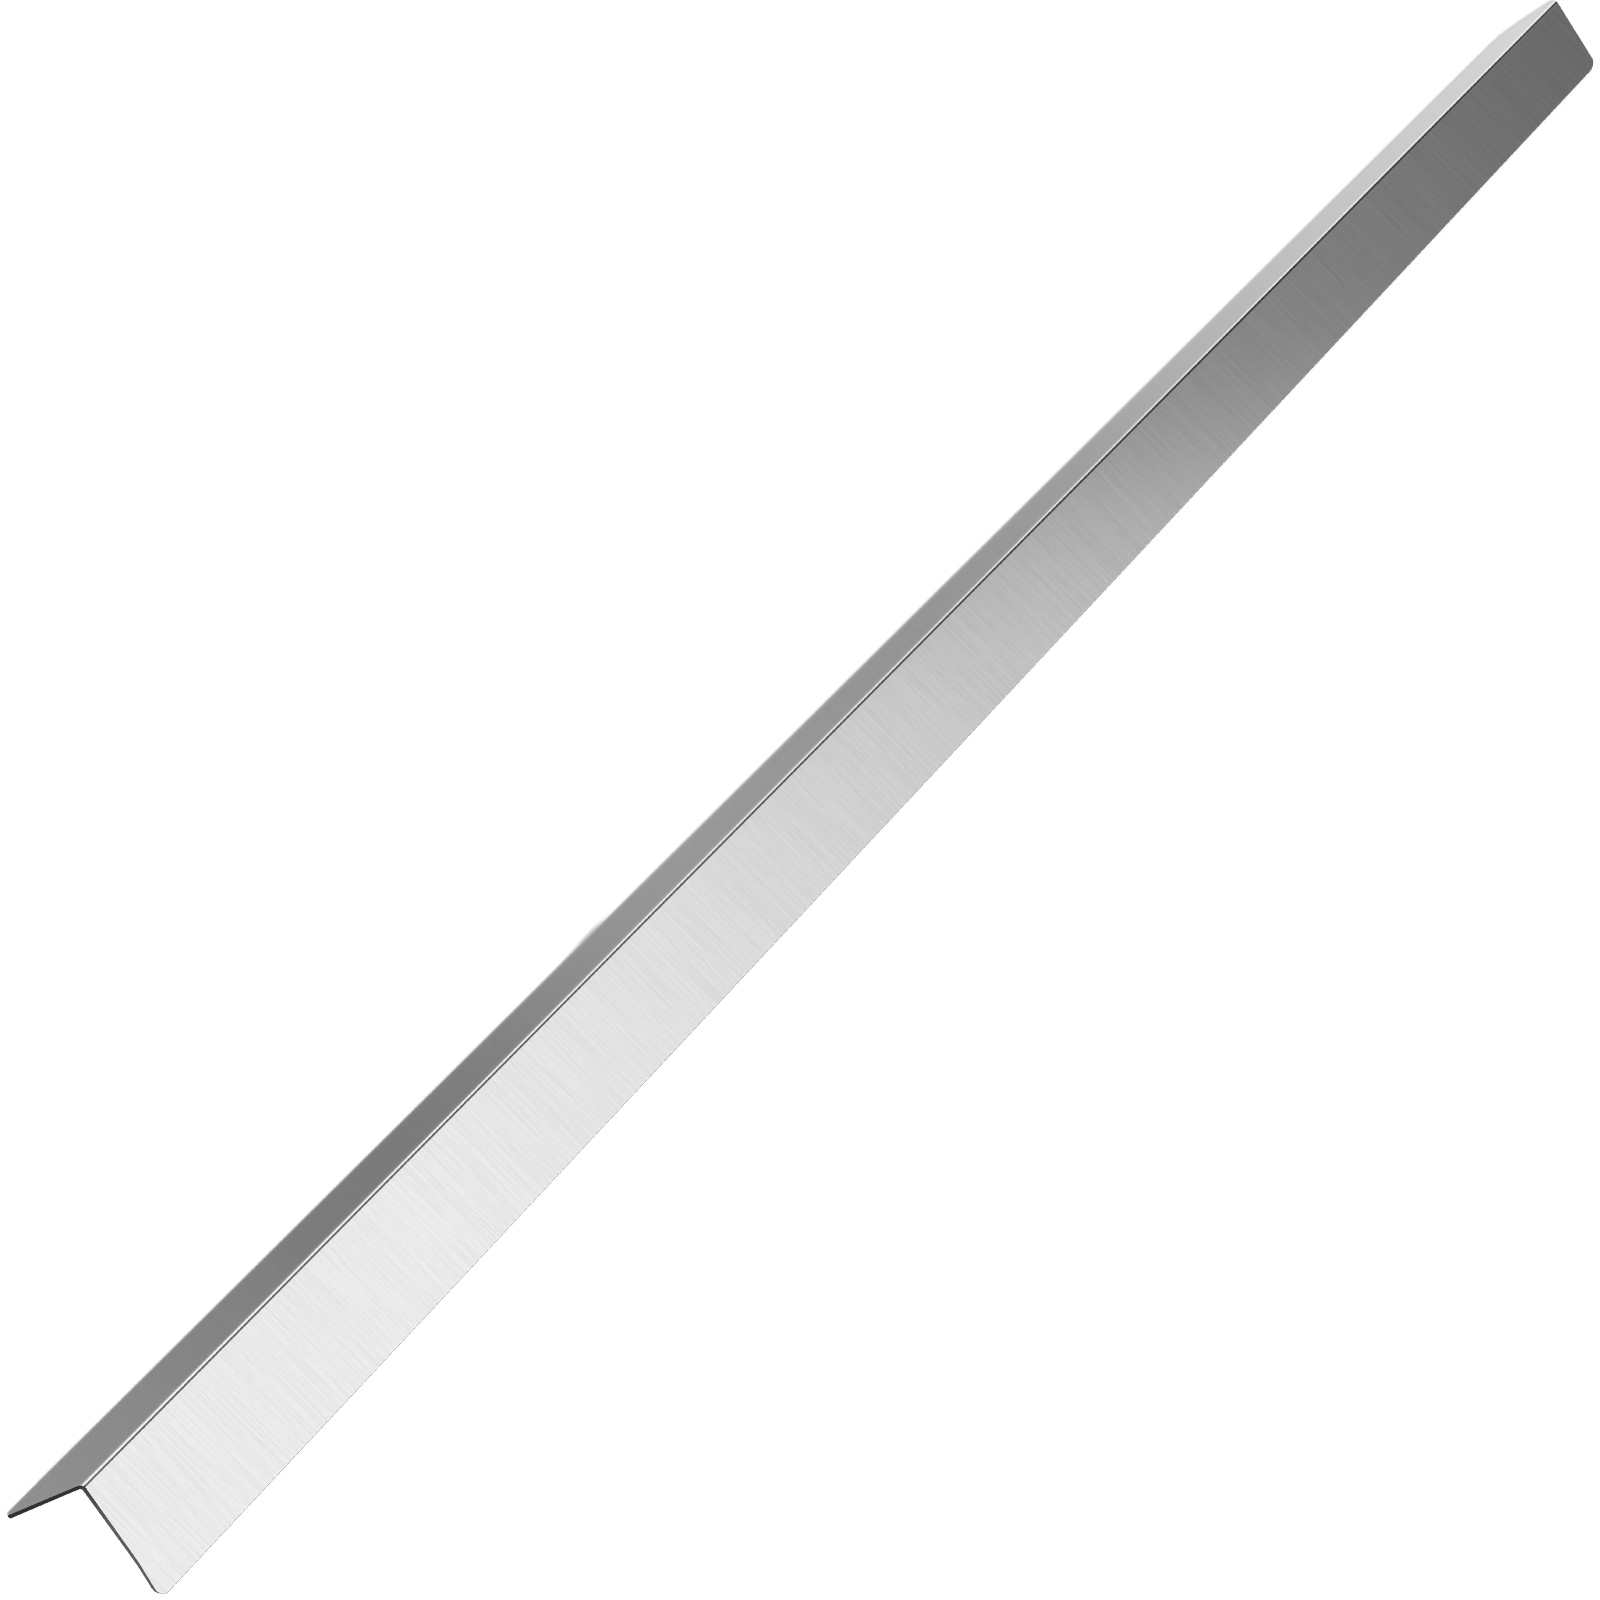 Stainless Steel Corner Guards 0.5 x 0.5 x 48 inch Metal Wall Corner  Protector Pack of 10 Corner Guards 20 Ga 304 Stainless Corner Guard with  90-Degree Angle for Wall Protection and Decoration